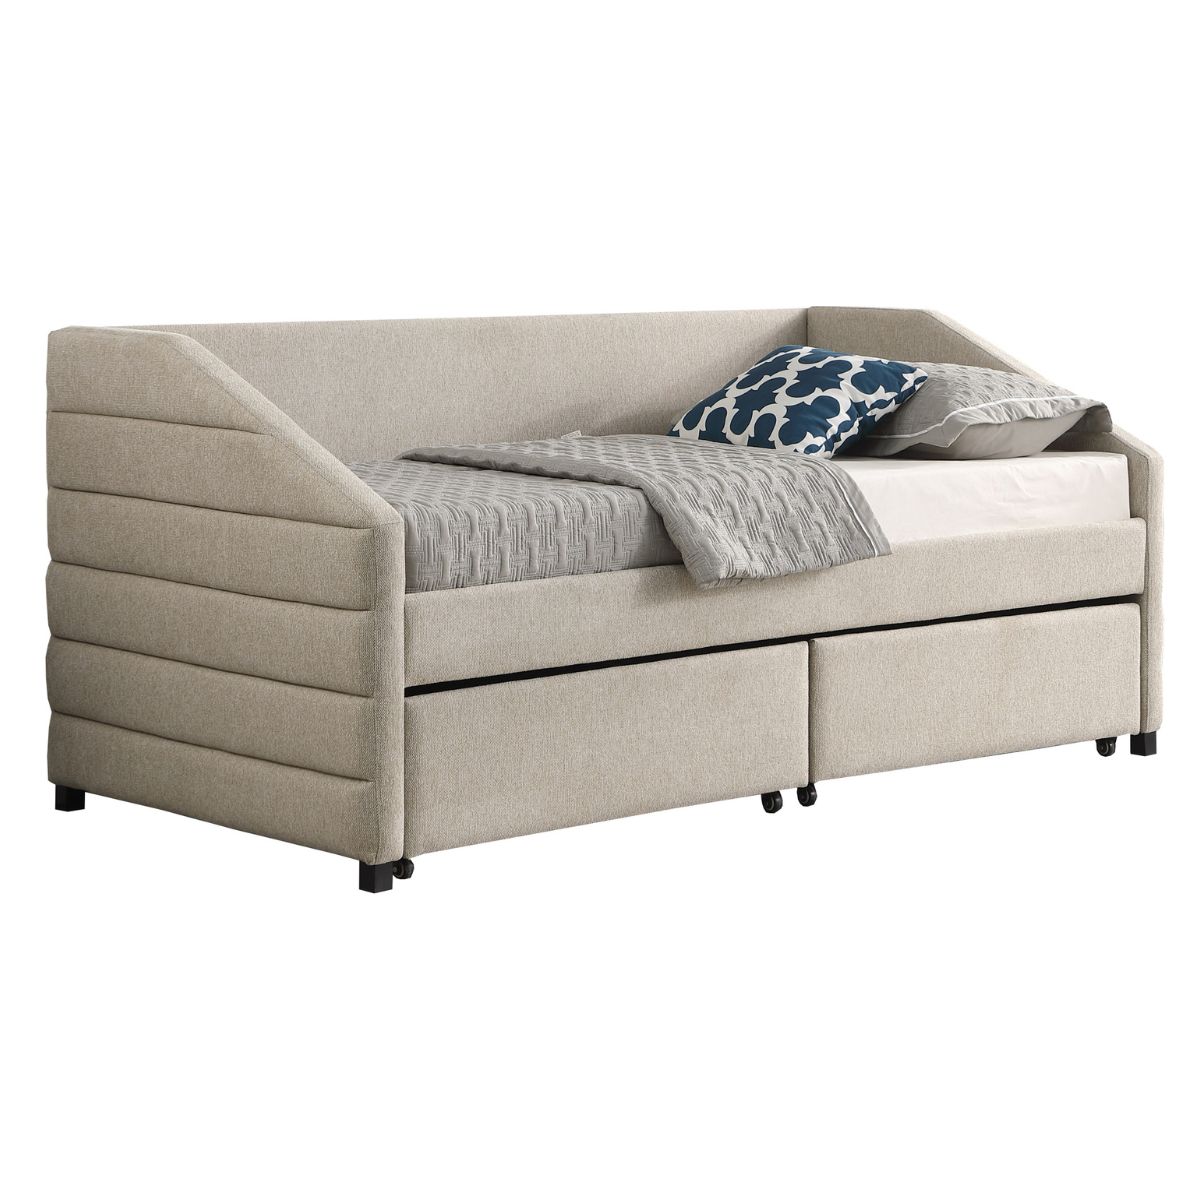 Baku Upholstered Day Bed with Storage Beige - 1